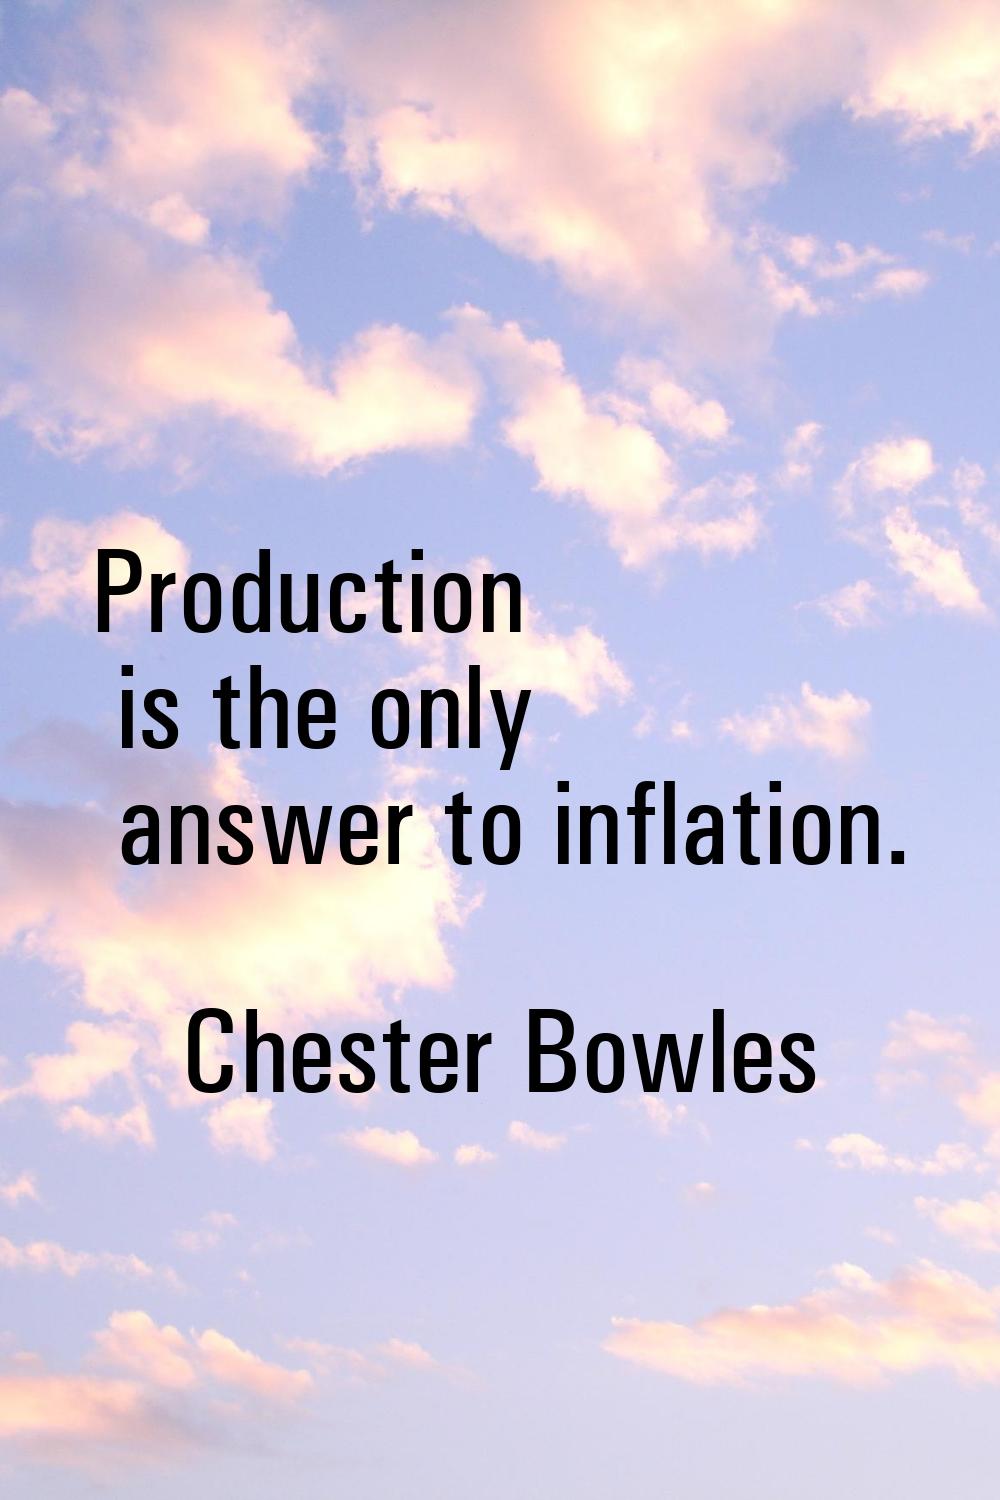 Production is the only answer to inflation.